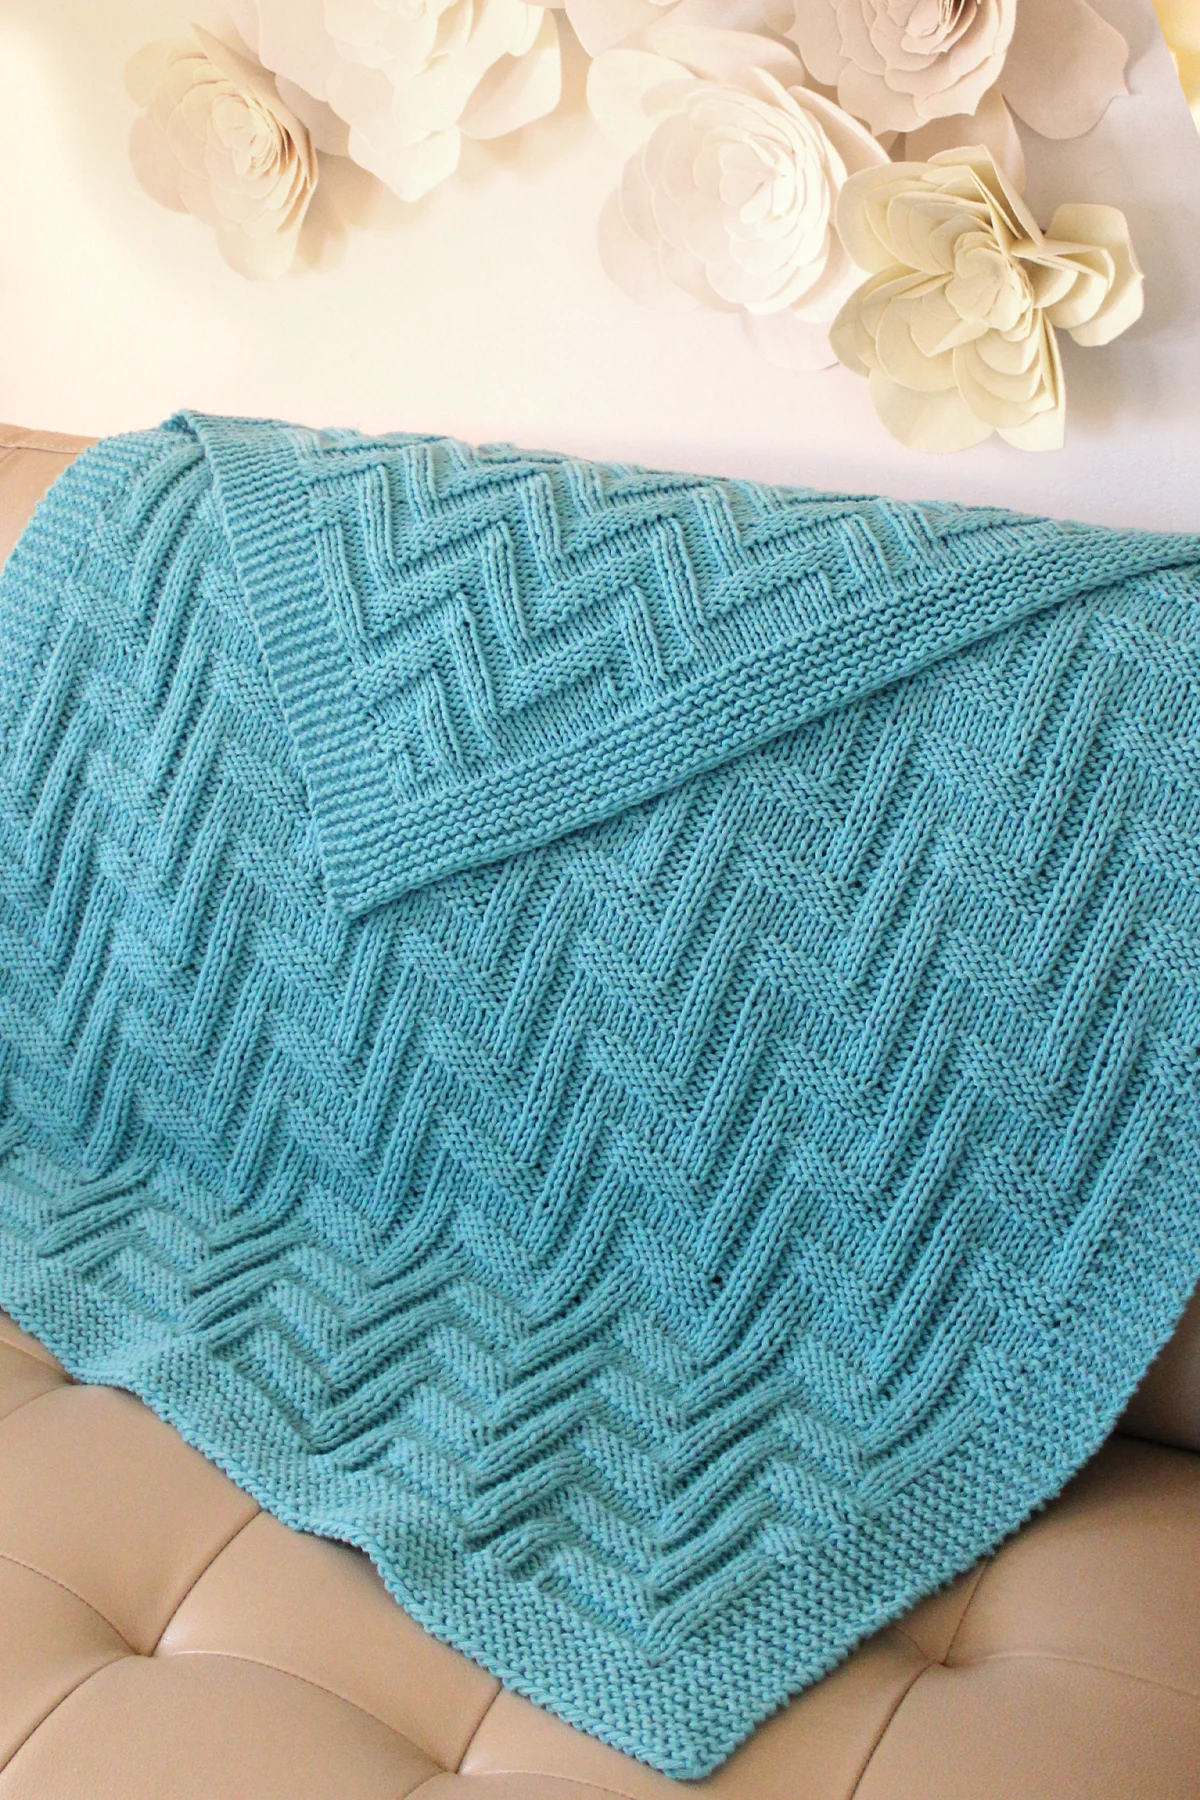 Blue knitted blanket in zigzag texture on beige leather couch.